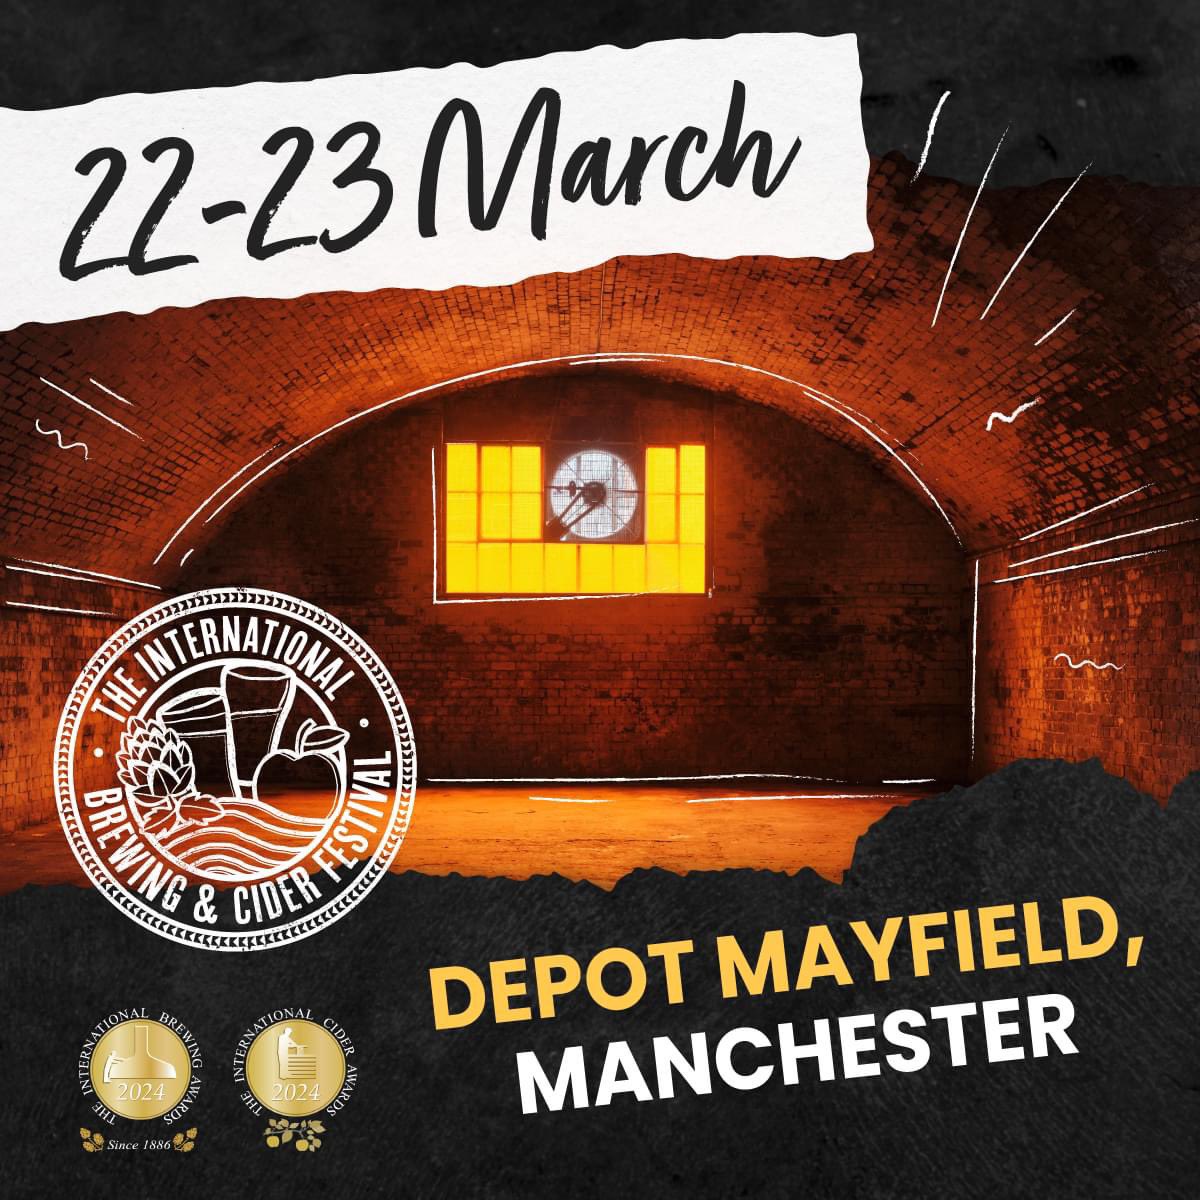 Got no plans this weekend and fancy trying a few new drinks? 🍻 Head on down to @depotmayfield for @IBCFest! Get your tickets now, and get 10% off using our code: FOREVER10 ibcfest.com/tickets/ We’re delighted to be one of the charity partners, so go on and support FM too!